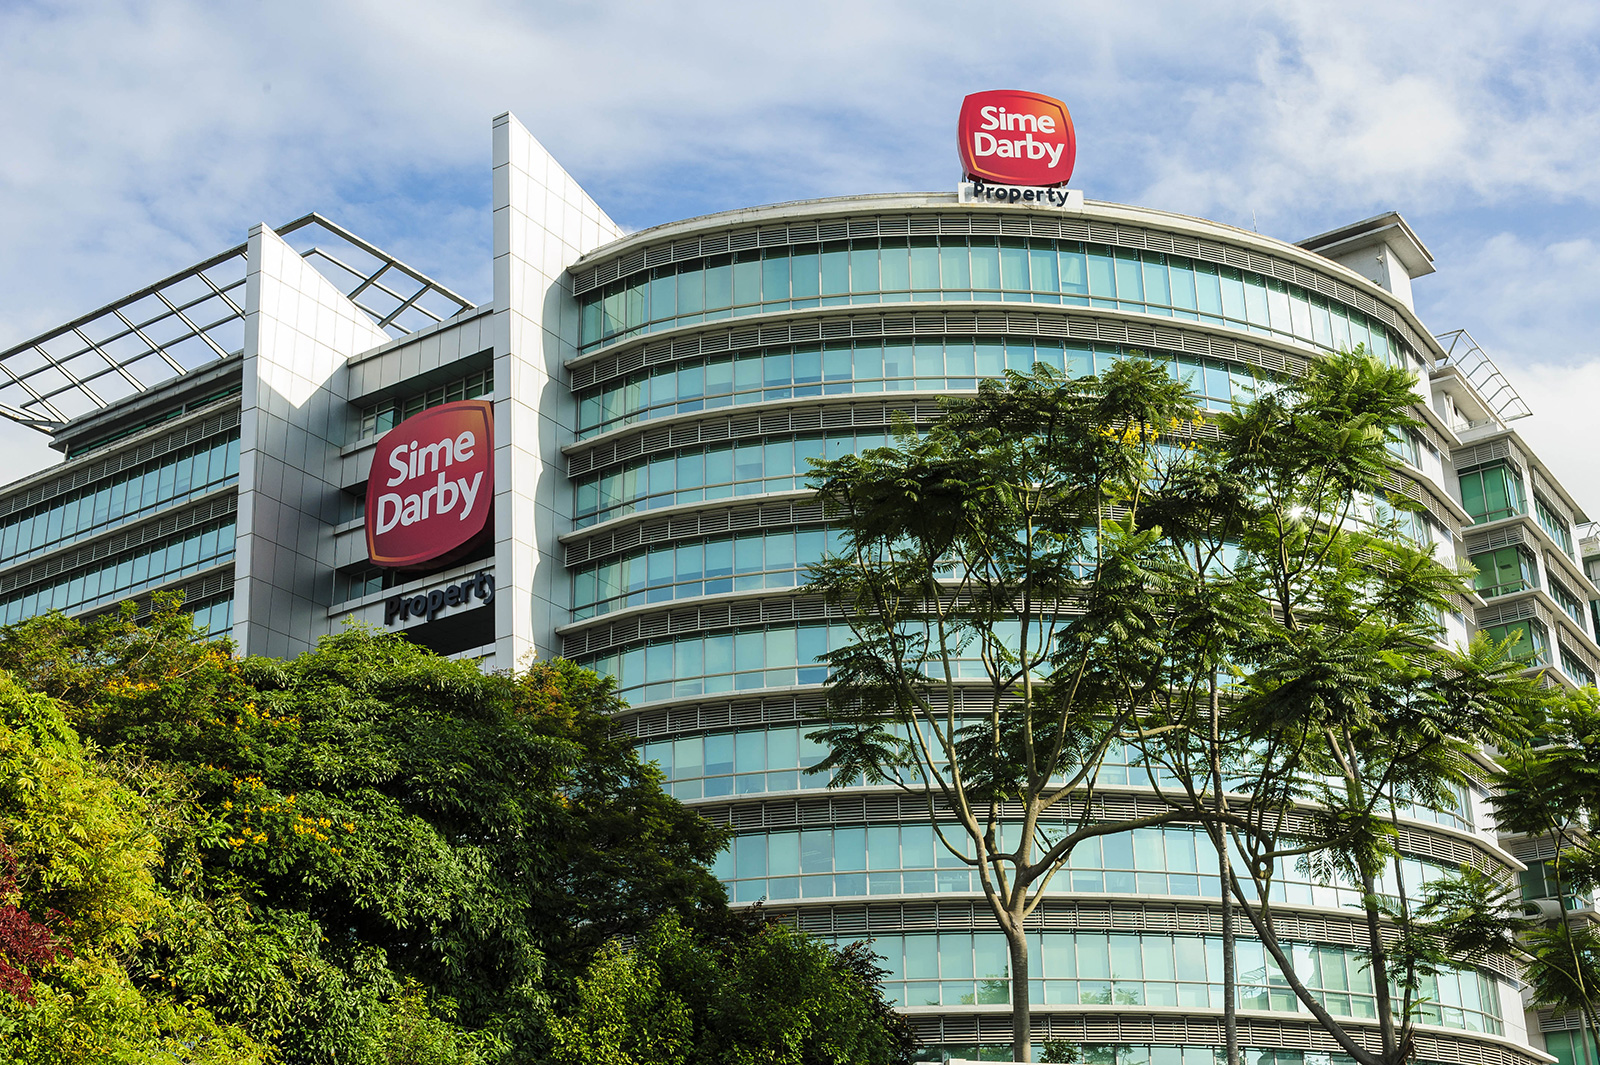 Sime Darby Property is enthusiastic about the Kapar land's potential to boost its future profitability and solidify its leadership position in the industrial development industry.